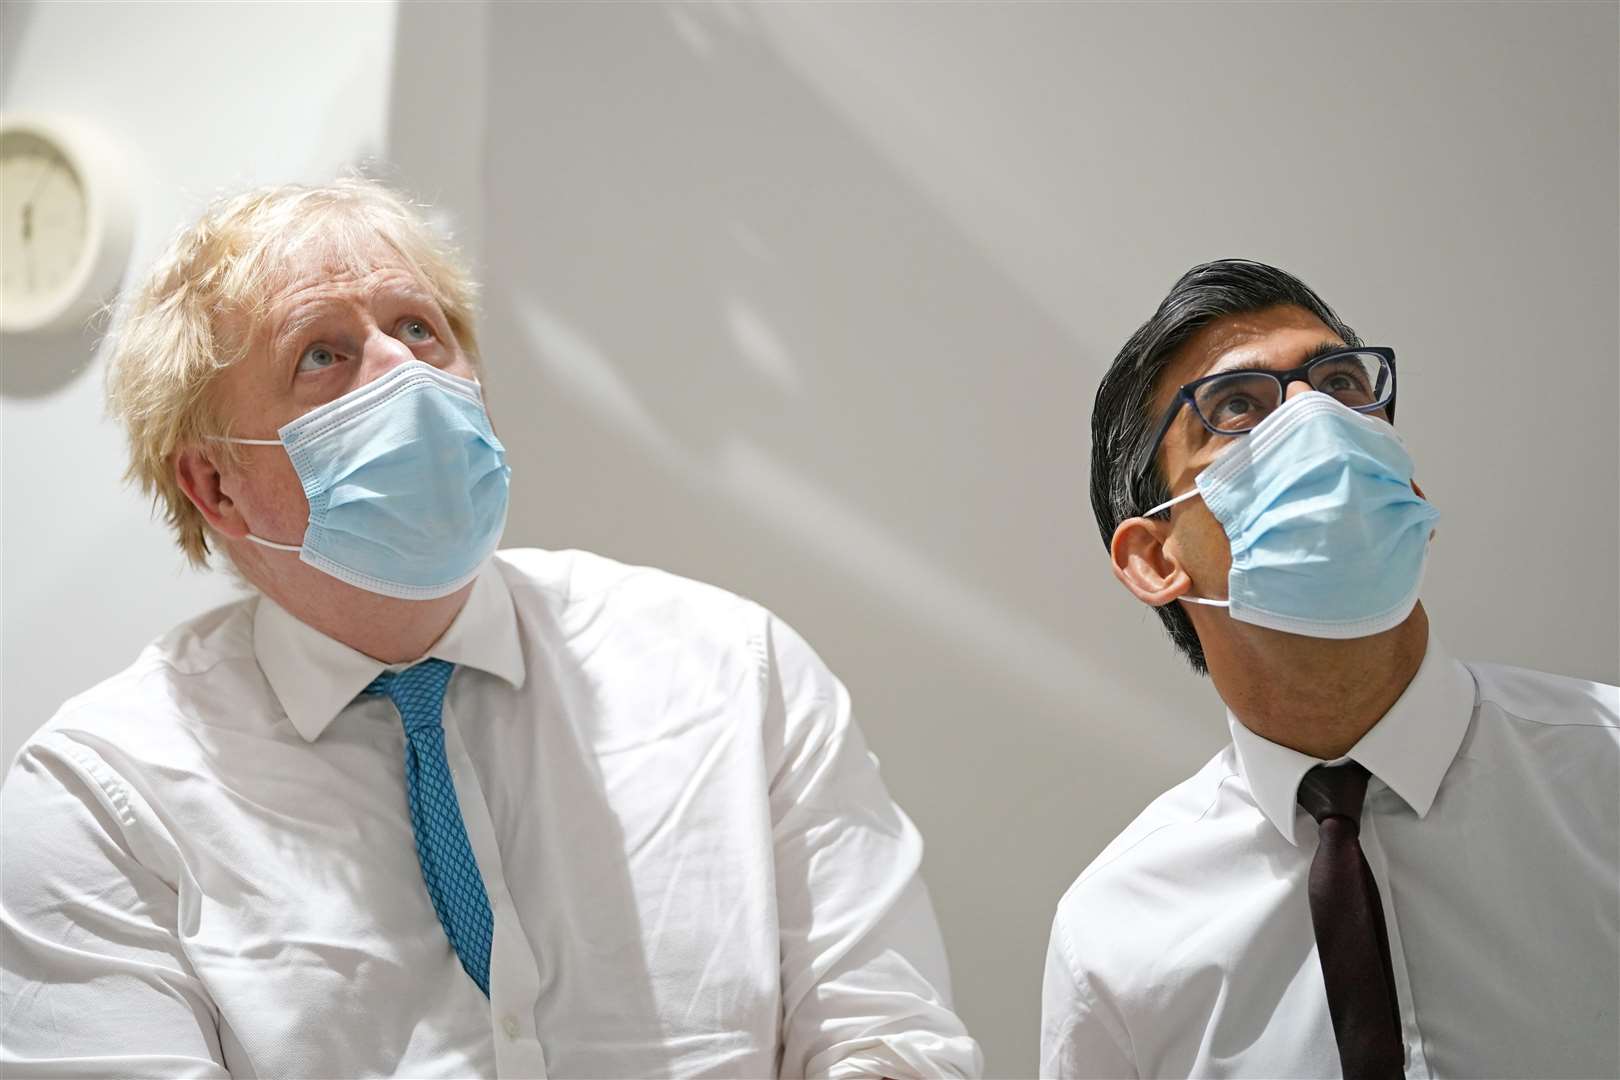 Boris Johnson, then the prime minister, and Rishi Sunak, then chancellor, during a visit to the Kent Oncology Centre at Maidstone Hospital in February 2022 (Gareth Fuller/PA)